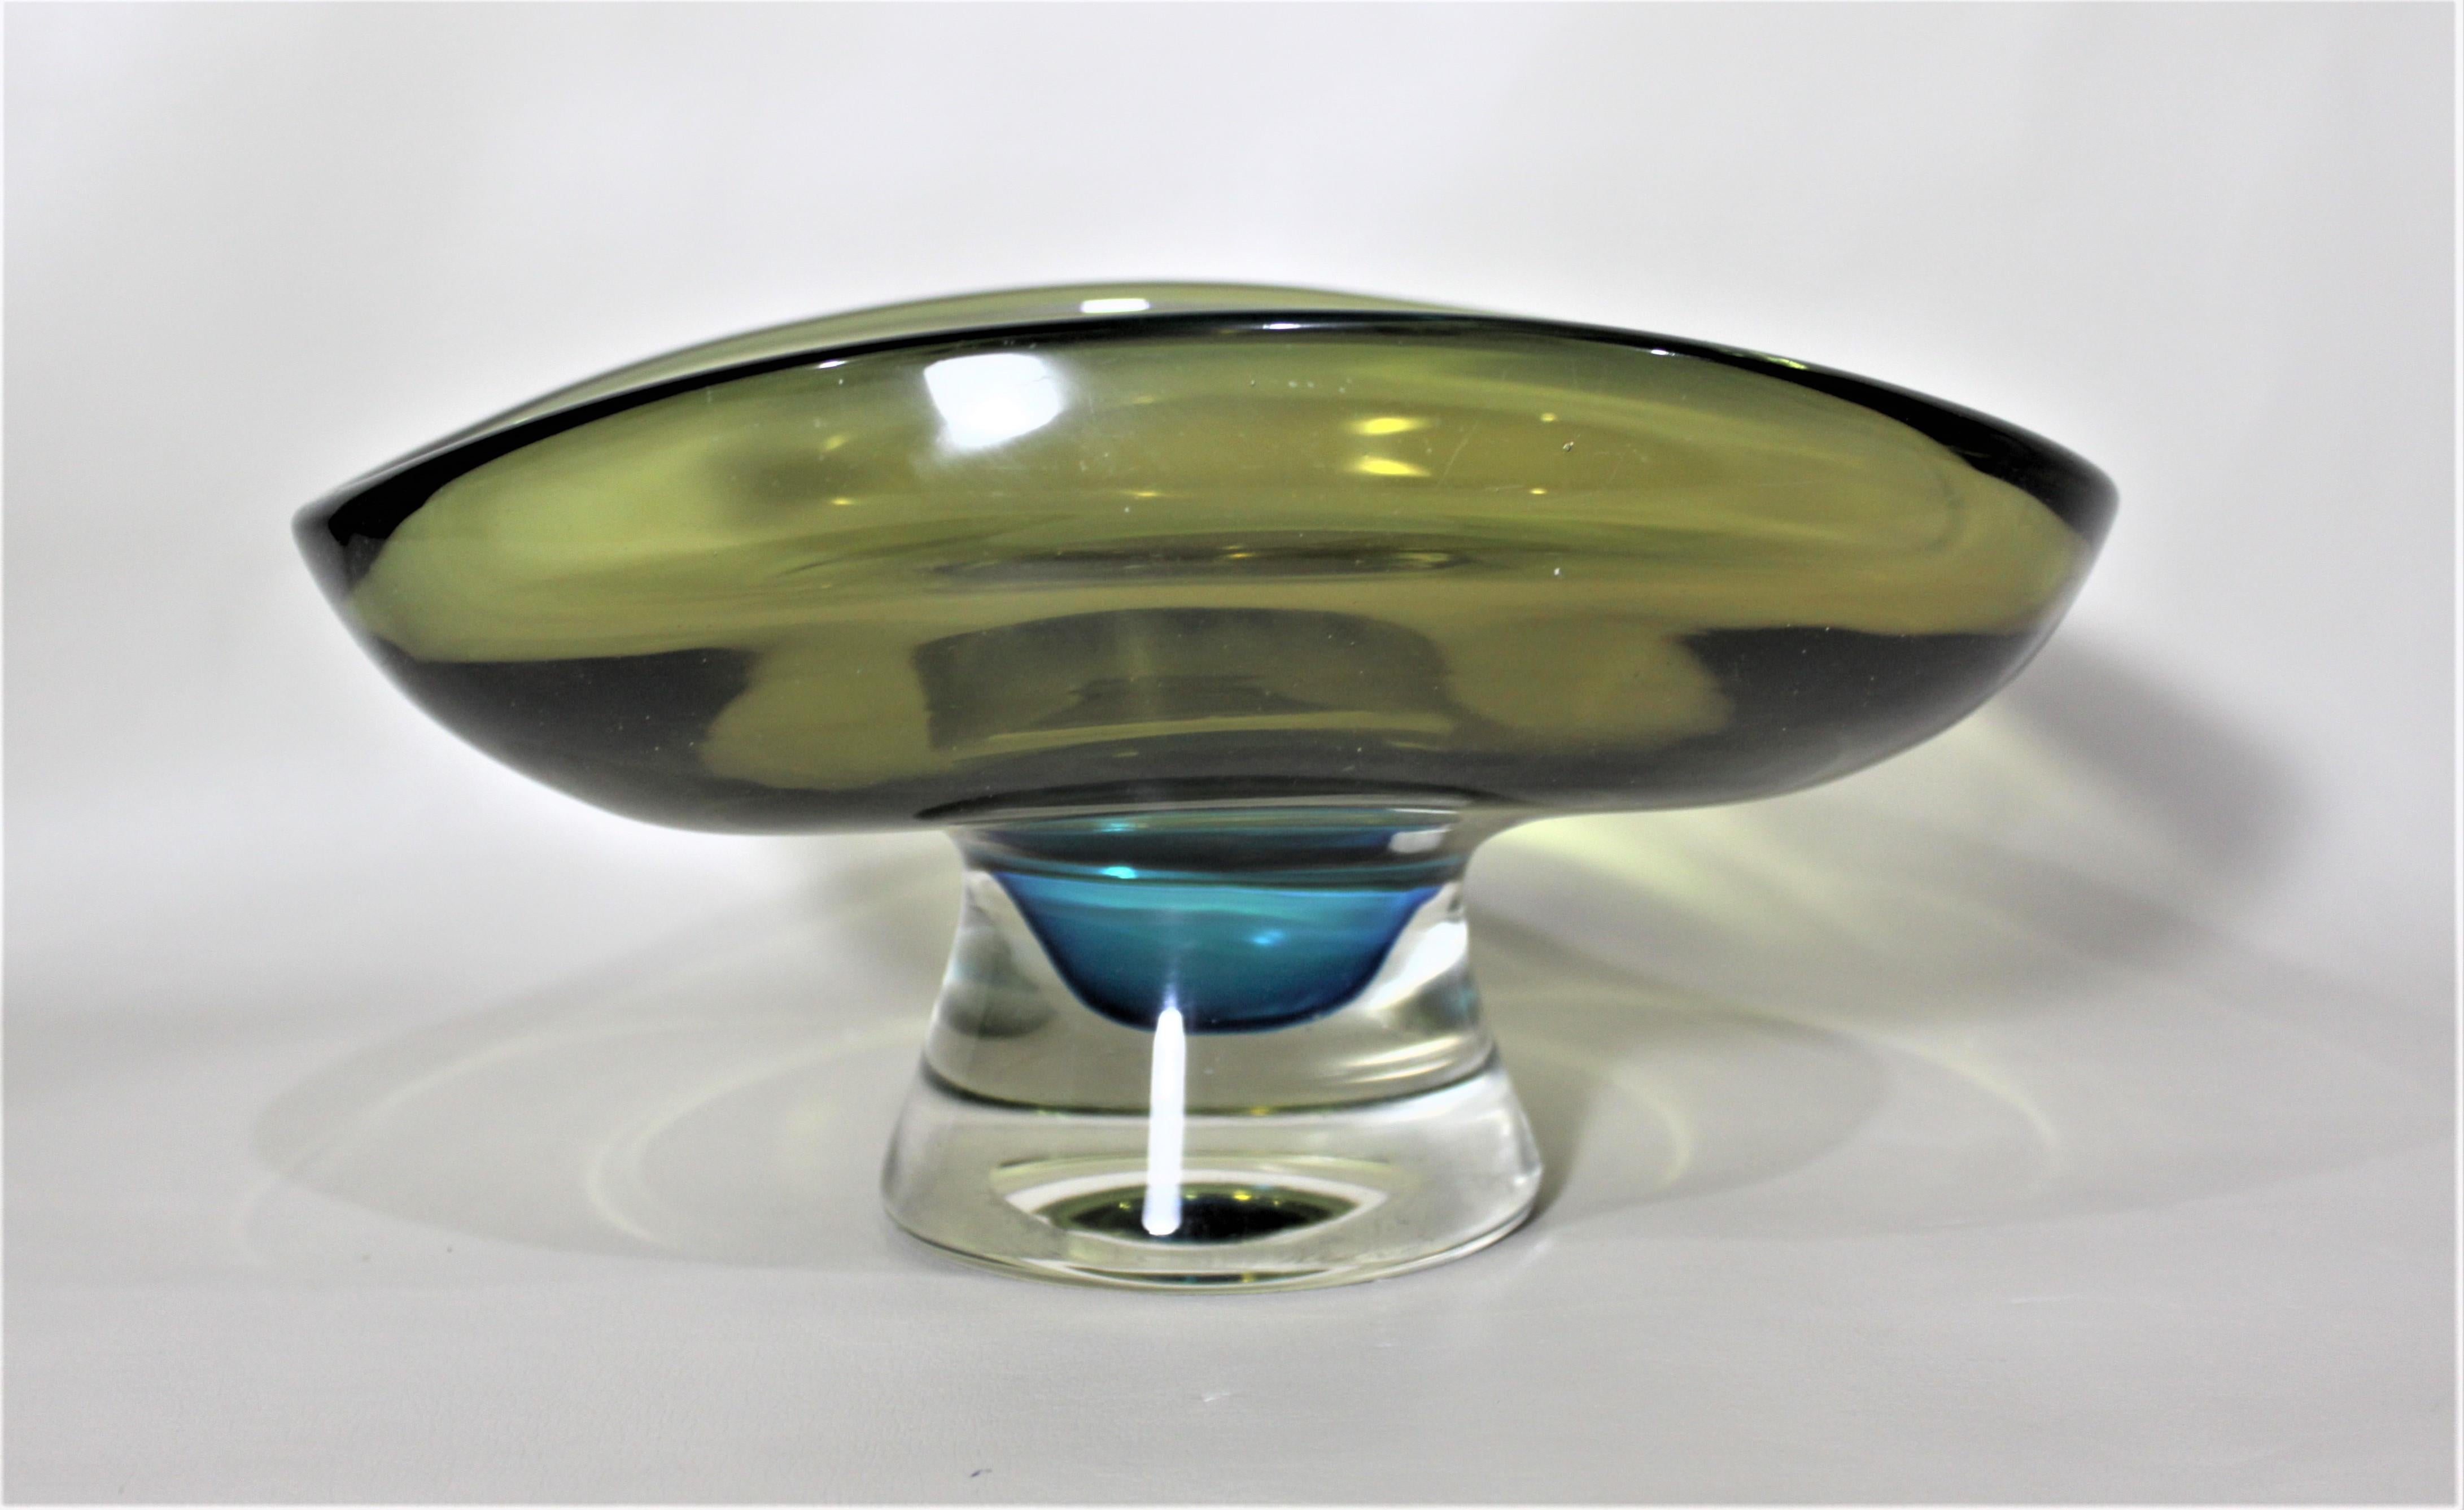 This Mid-Century Modern art glass pedestal, or centerpiece bowl is unsigned but presumed to have been made by Kosta Boda. The bowl is done in a deep olive green with a clear pedestal base with a cobalt blue inclusion.